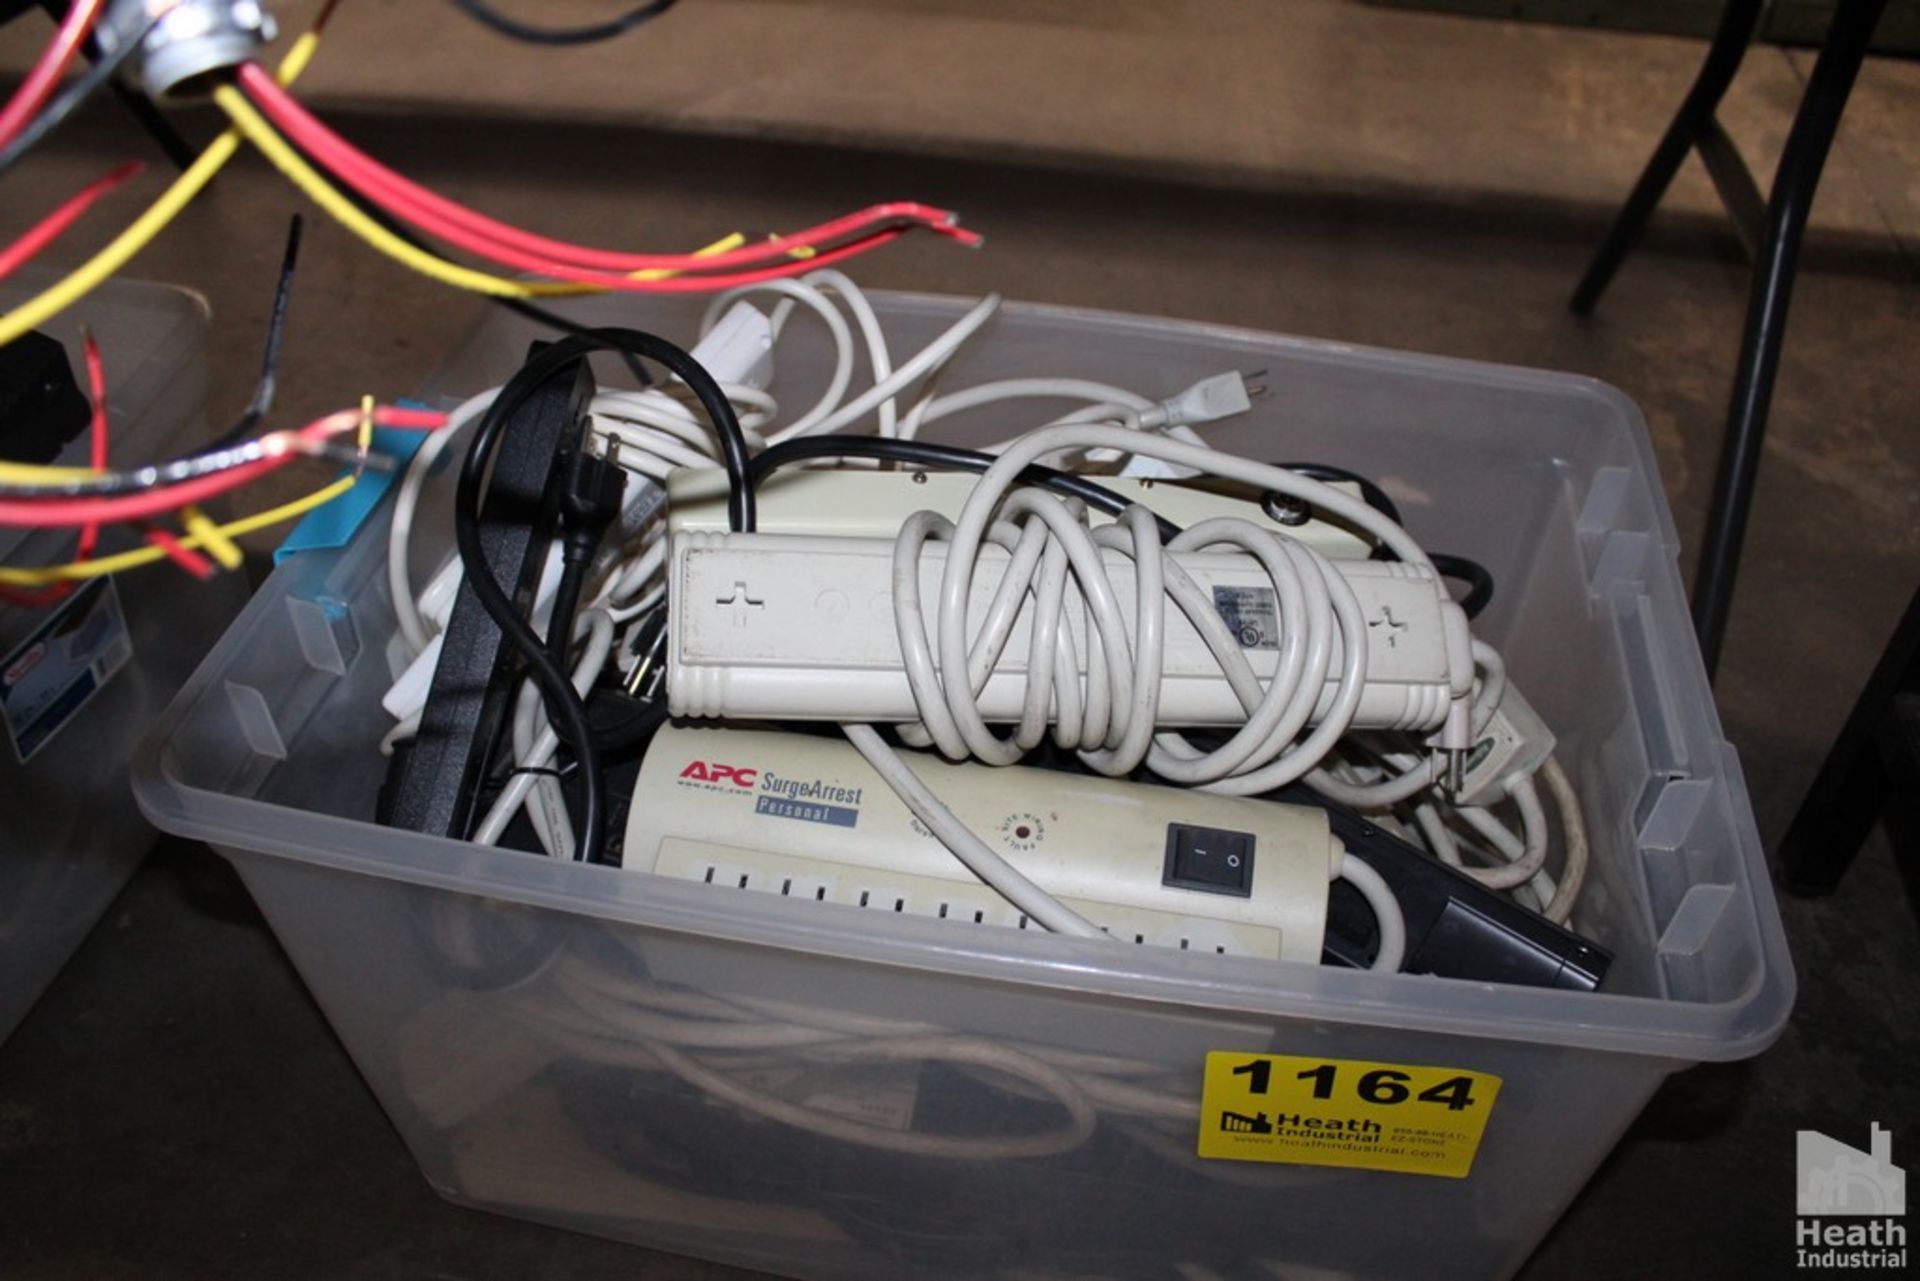 LARGE QUANTITY OF POWER STRIPS IN TOTE